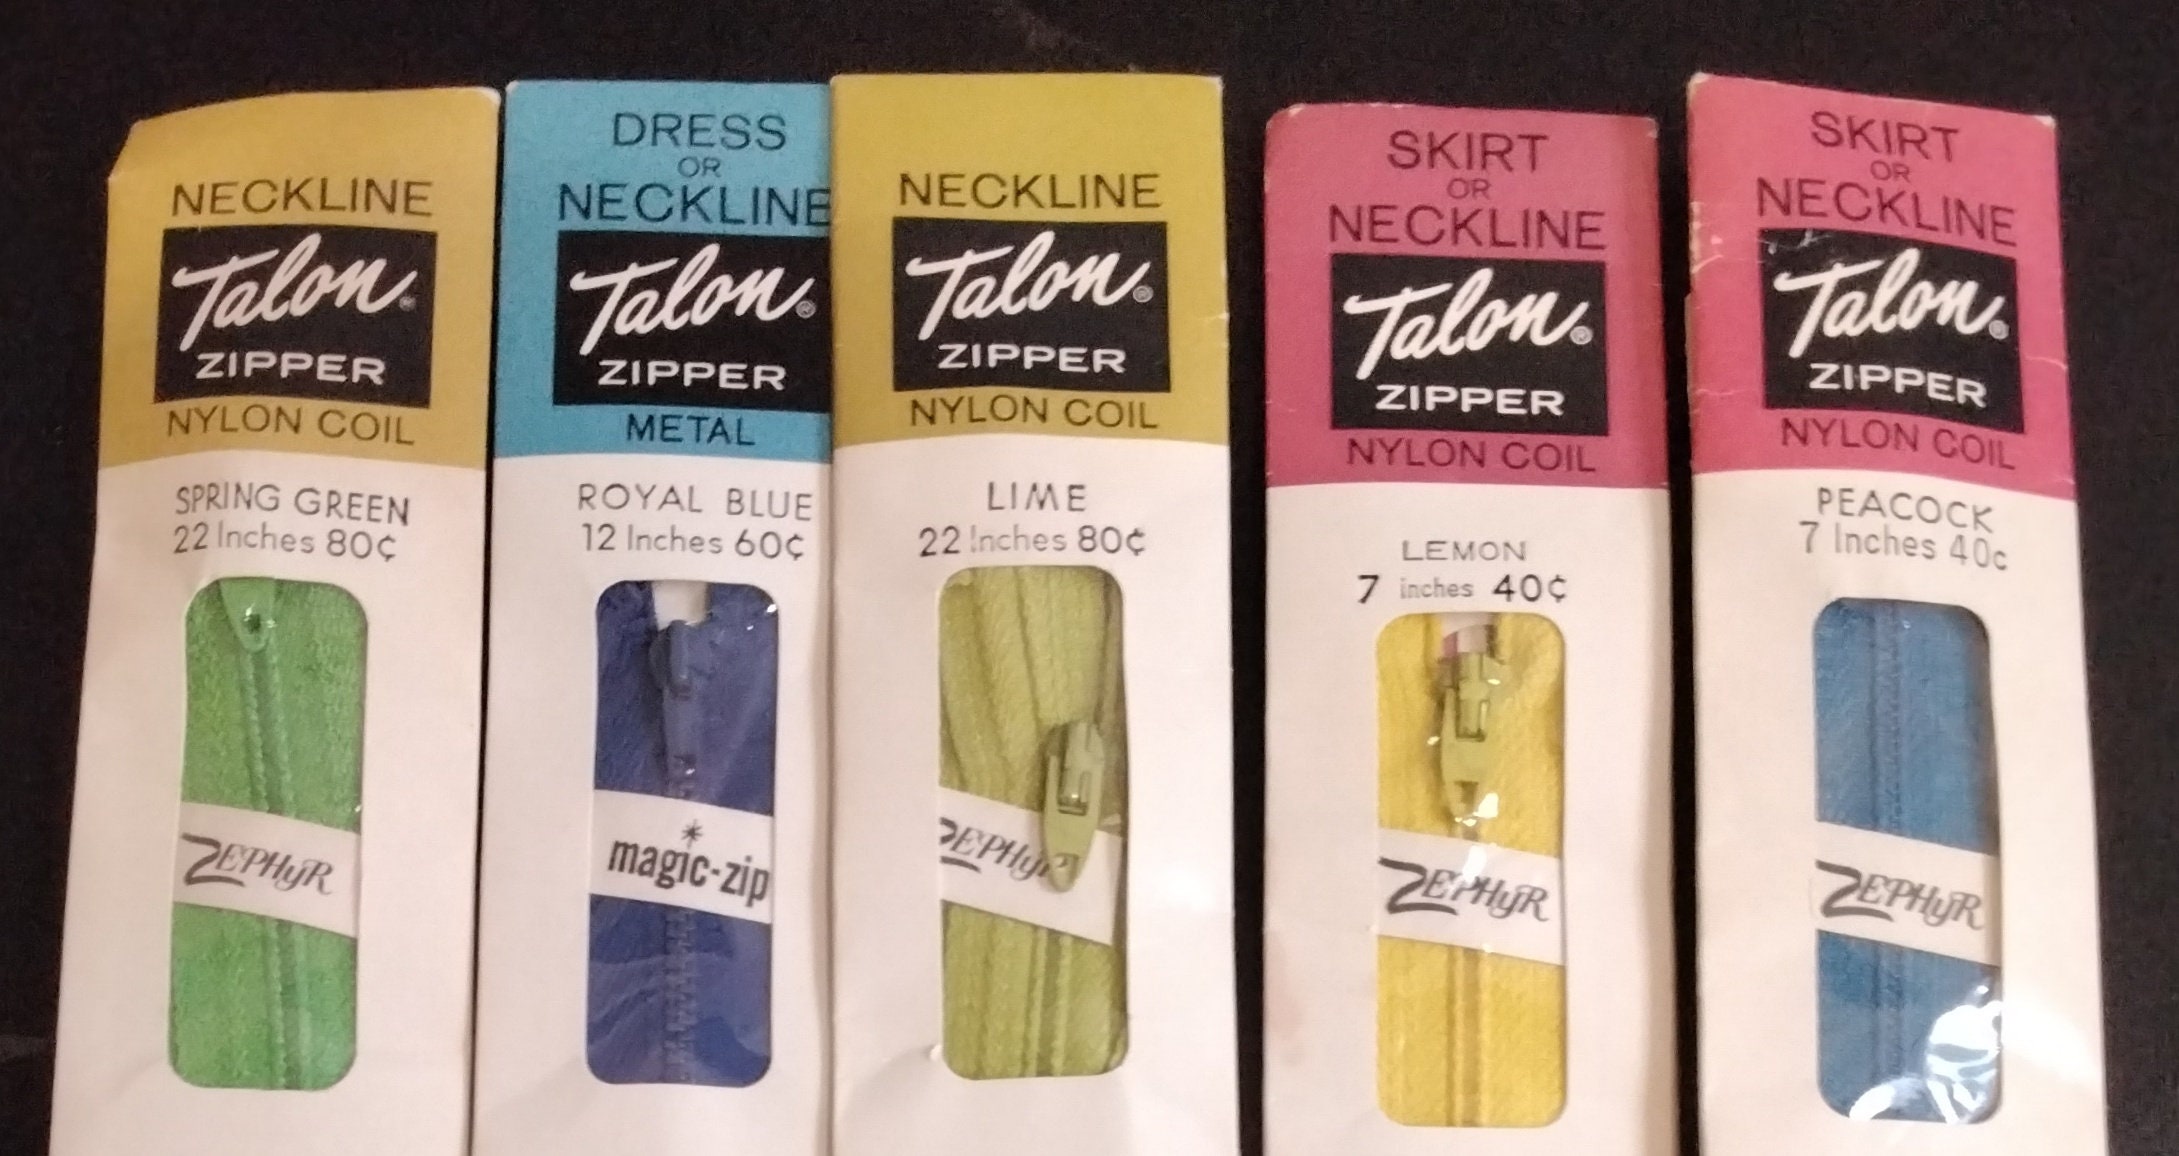 Vintage Talon Zippers for Skirt or Neckline Mixed Lot of 4 